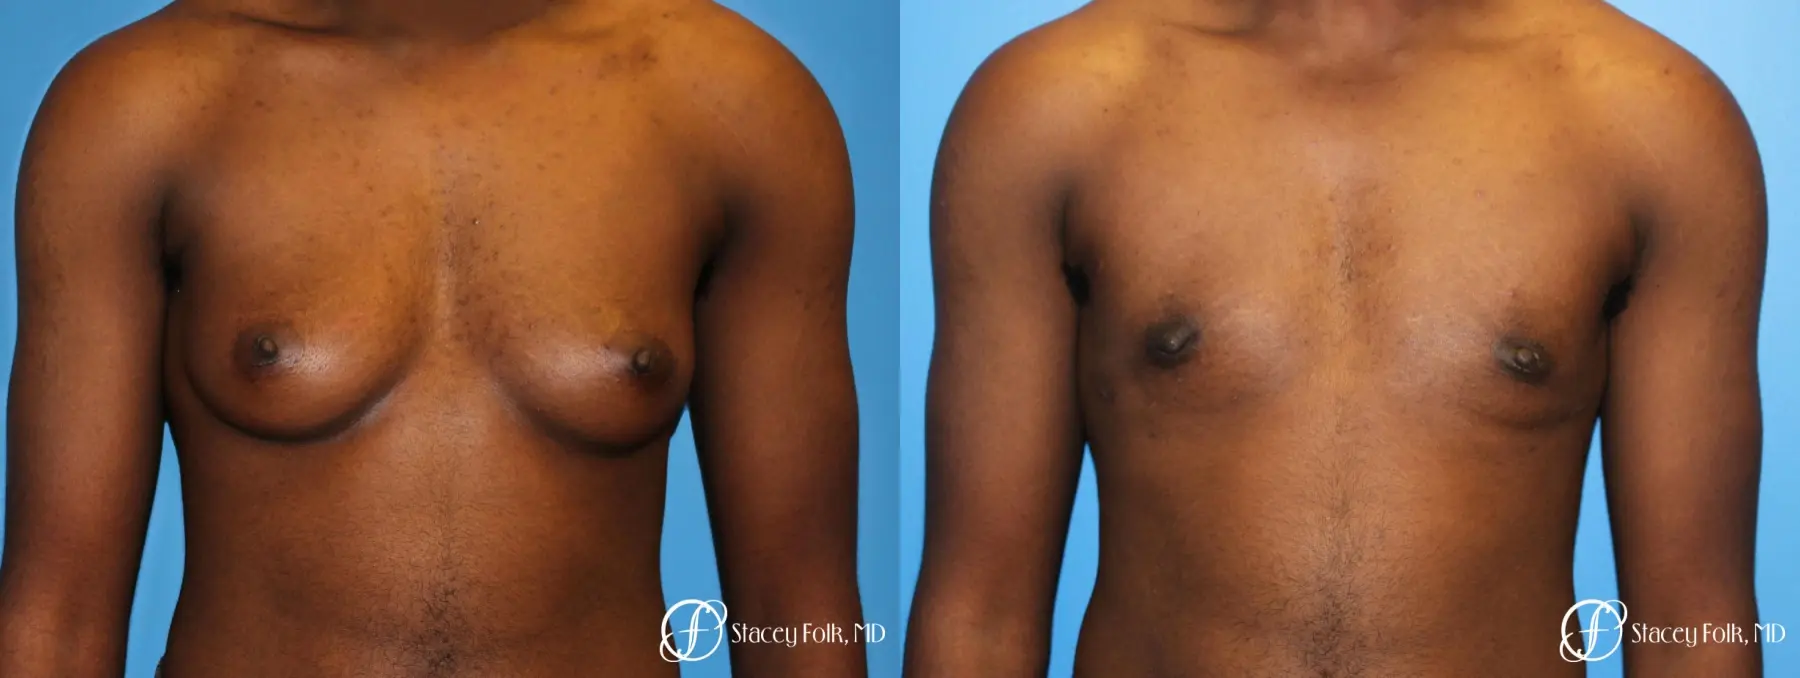 Denver FTM Female to male top surgery using gynecomastia technique 5497 - Before and After 1